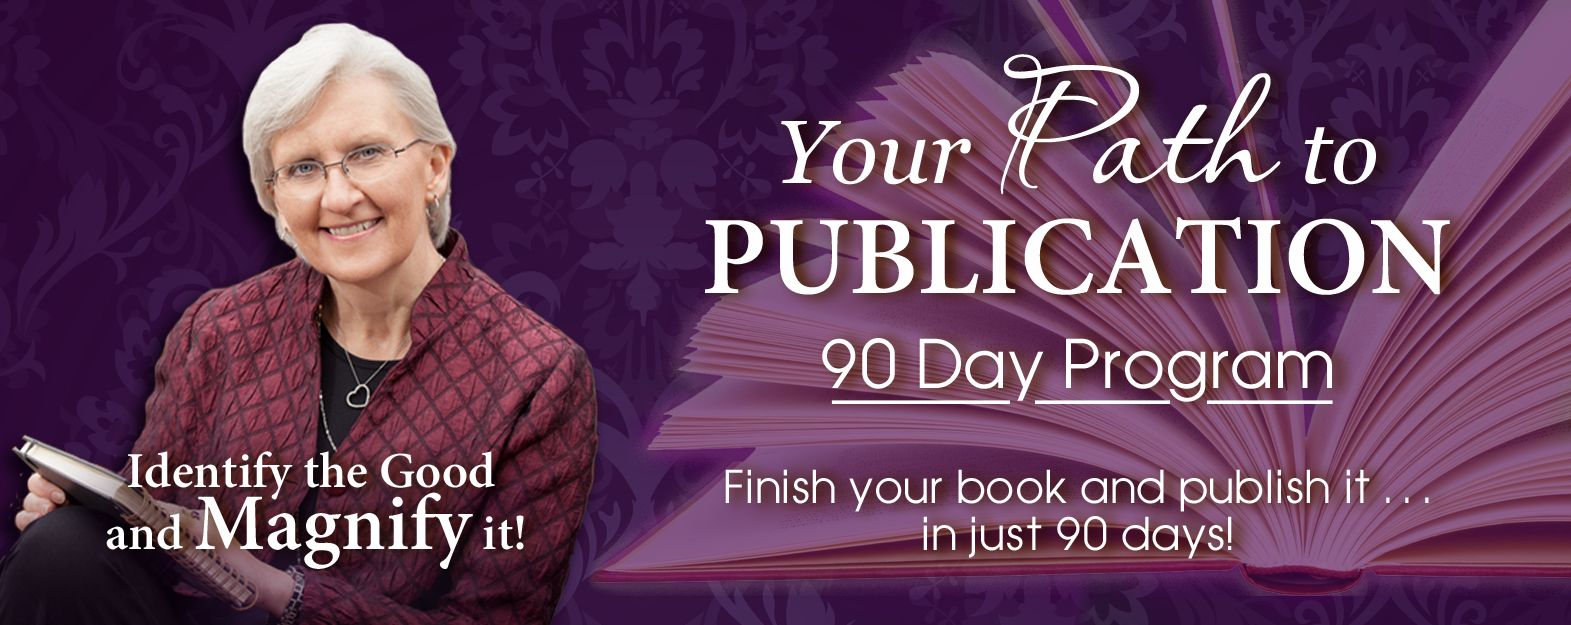 Path to Publication 90-Day Program with Barbara Hollace